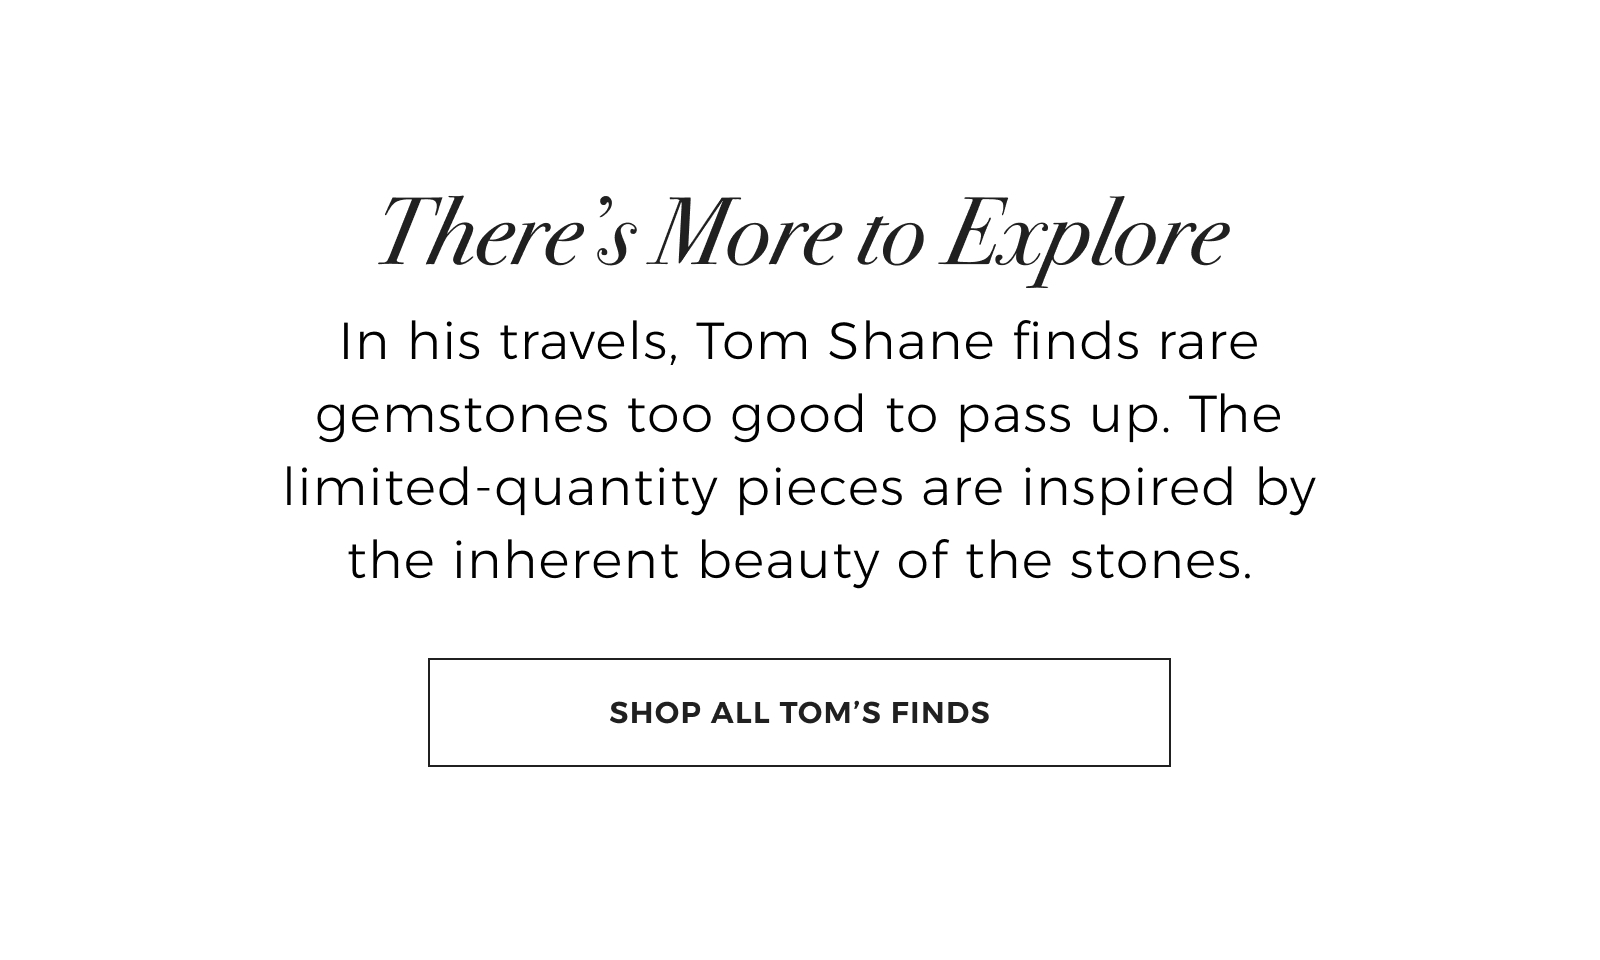 Theres More to Explore - In his travels, Tom Shane finds rare gemstones too good to pass up. The limited-quantity pieces are inspired by the inherent beauty of the stones. Shop All Toms Finds >